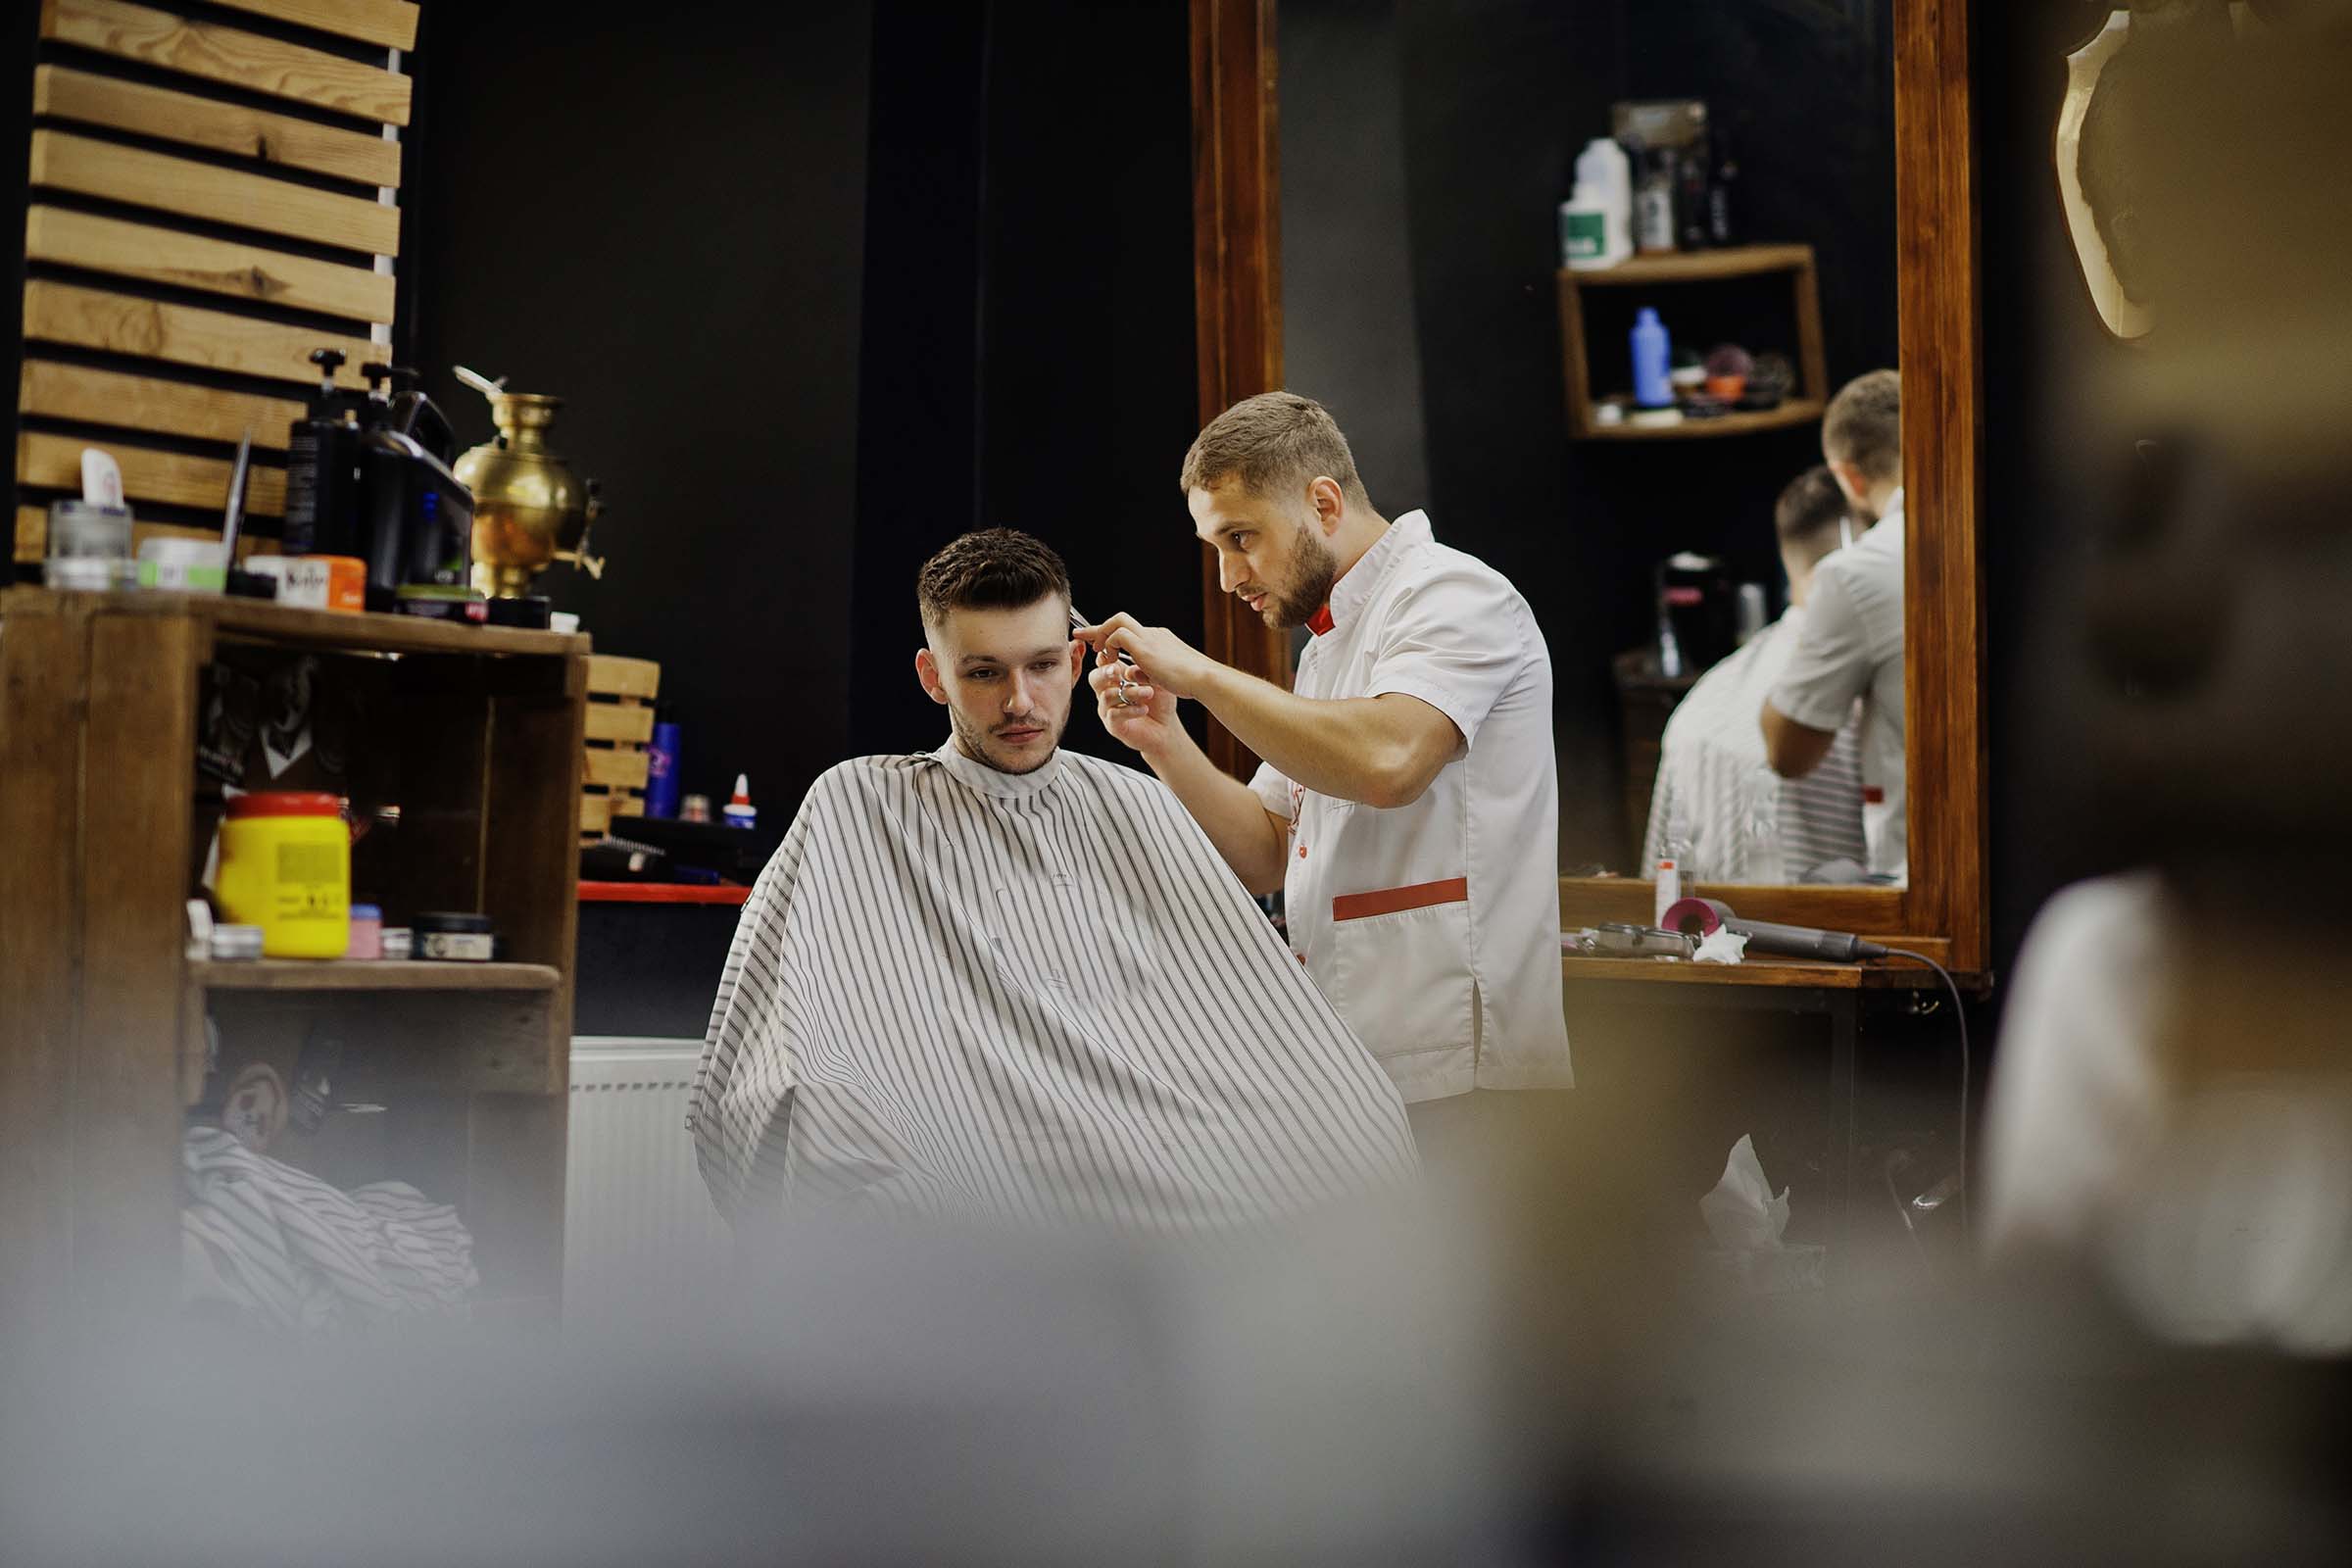 Young bearded man getting haircut by hairdresser while sitting in chair at barbershop. Barber soul.